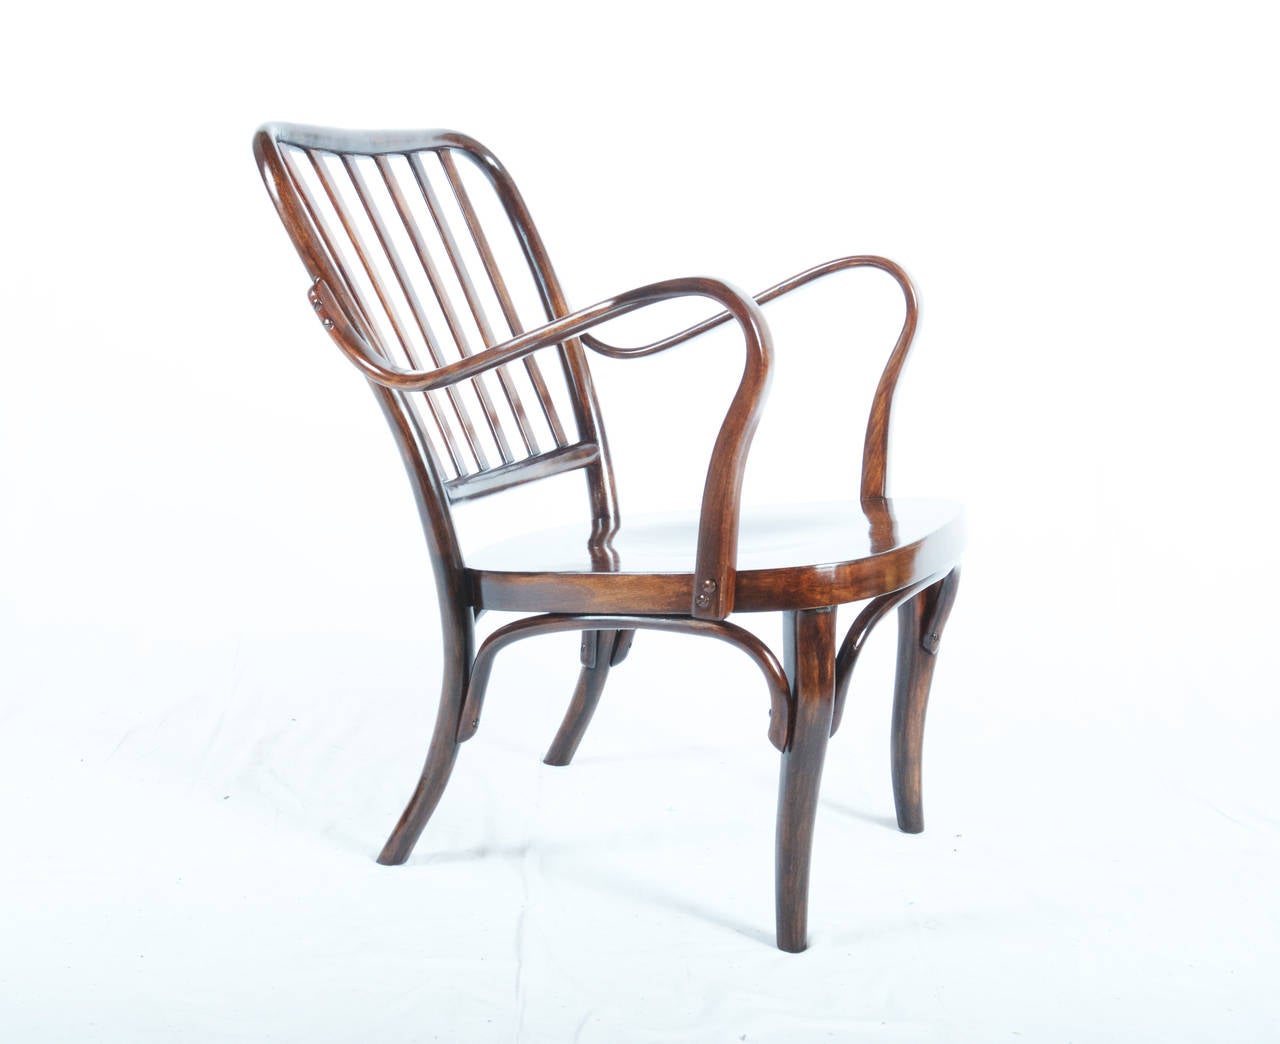 Thonet armchair No 752 by Josef Frank designed in the 1920's.
this model is a later one from 1950's with TON signature this was the follower from the original Thonet factory in Bysrice pod Hostinem.

Armchair is completely restored with shellack